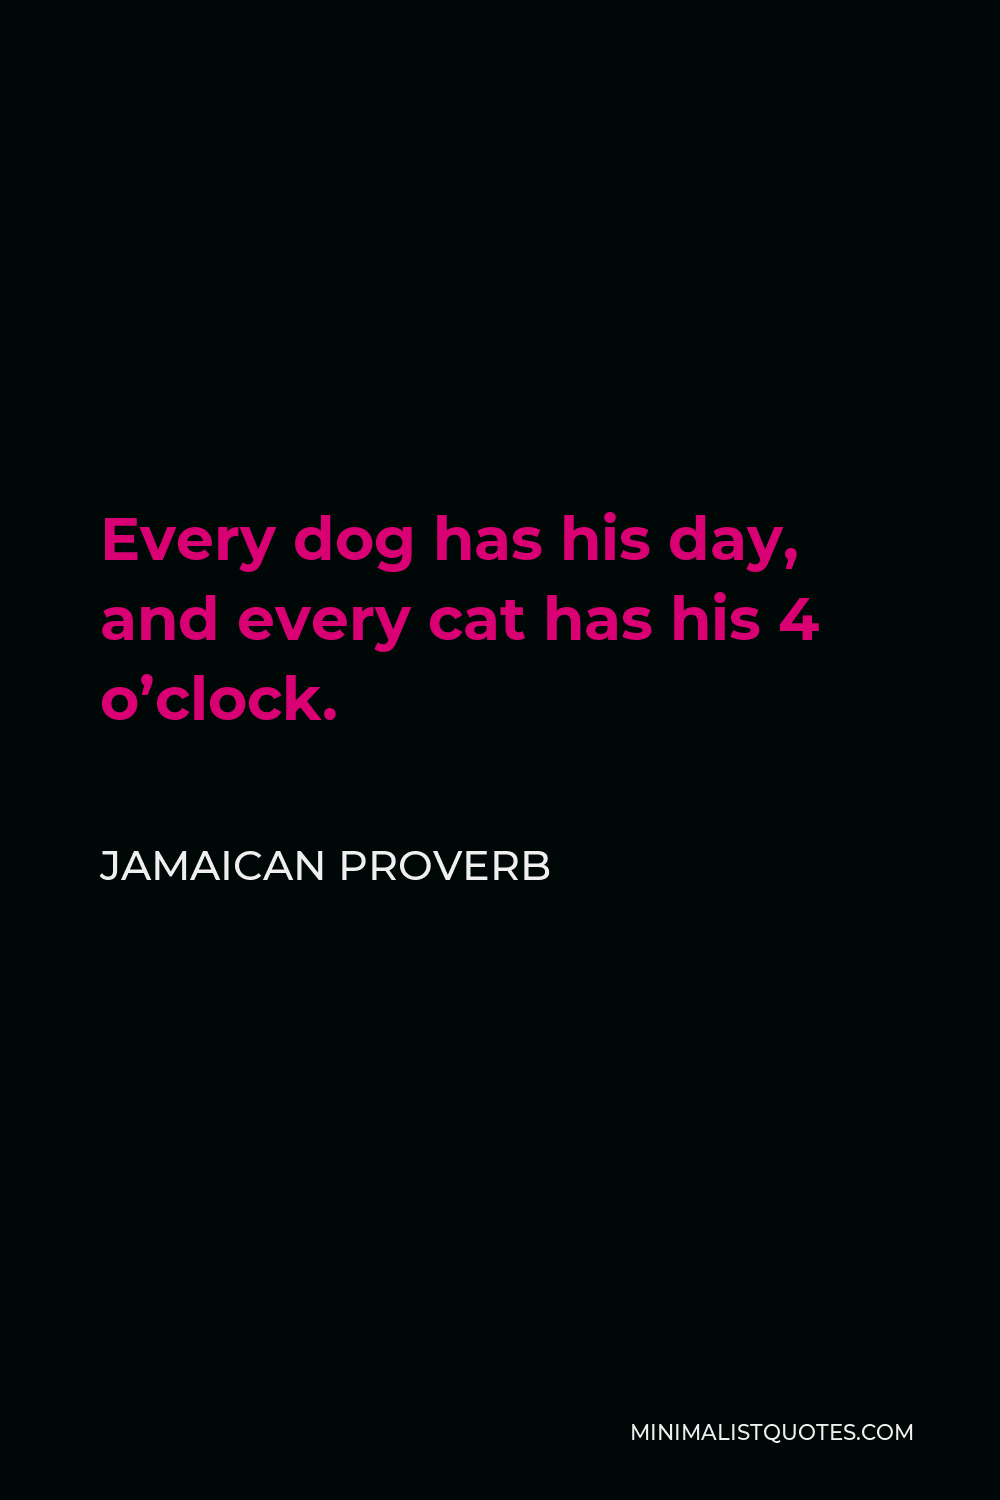 Jamaican Proverb Quote - Every dog has his day, and every cat has his 4 o’clock.